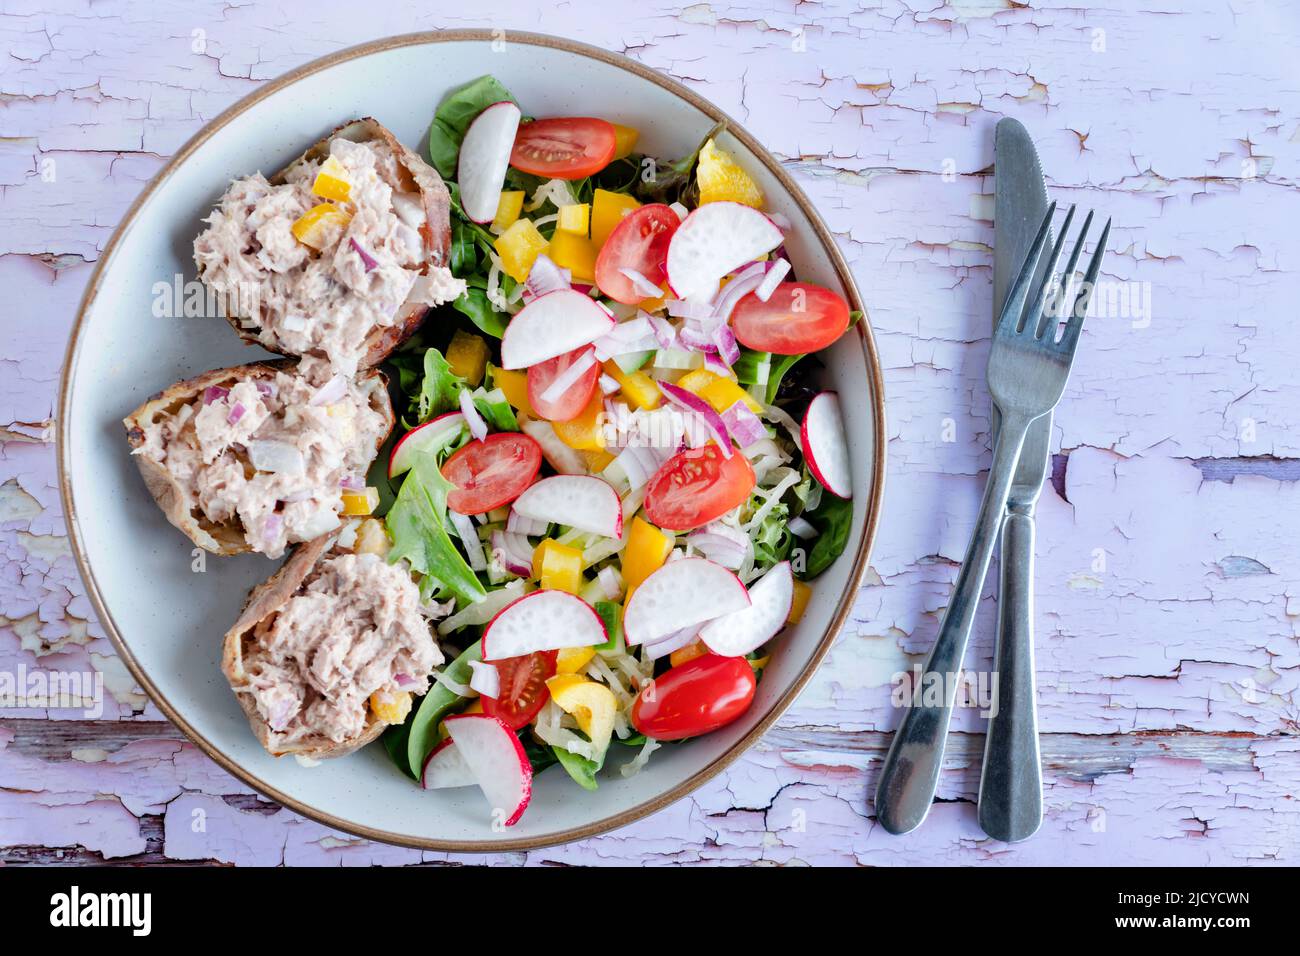 A tinned tuna salad served in a bowl. The tuna is served in empty baked potato skins with a fresh green leaf salad. A healthy keto friendly meal Stock Photo